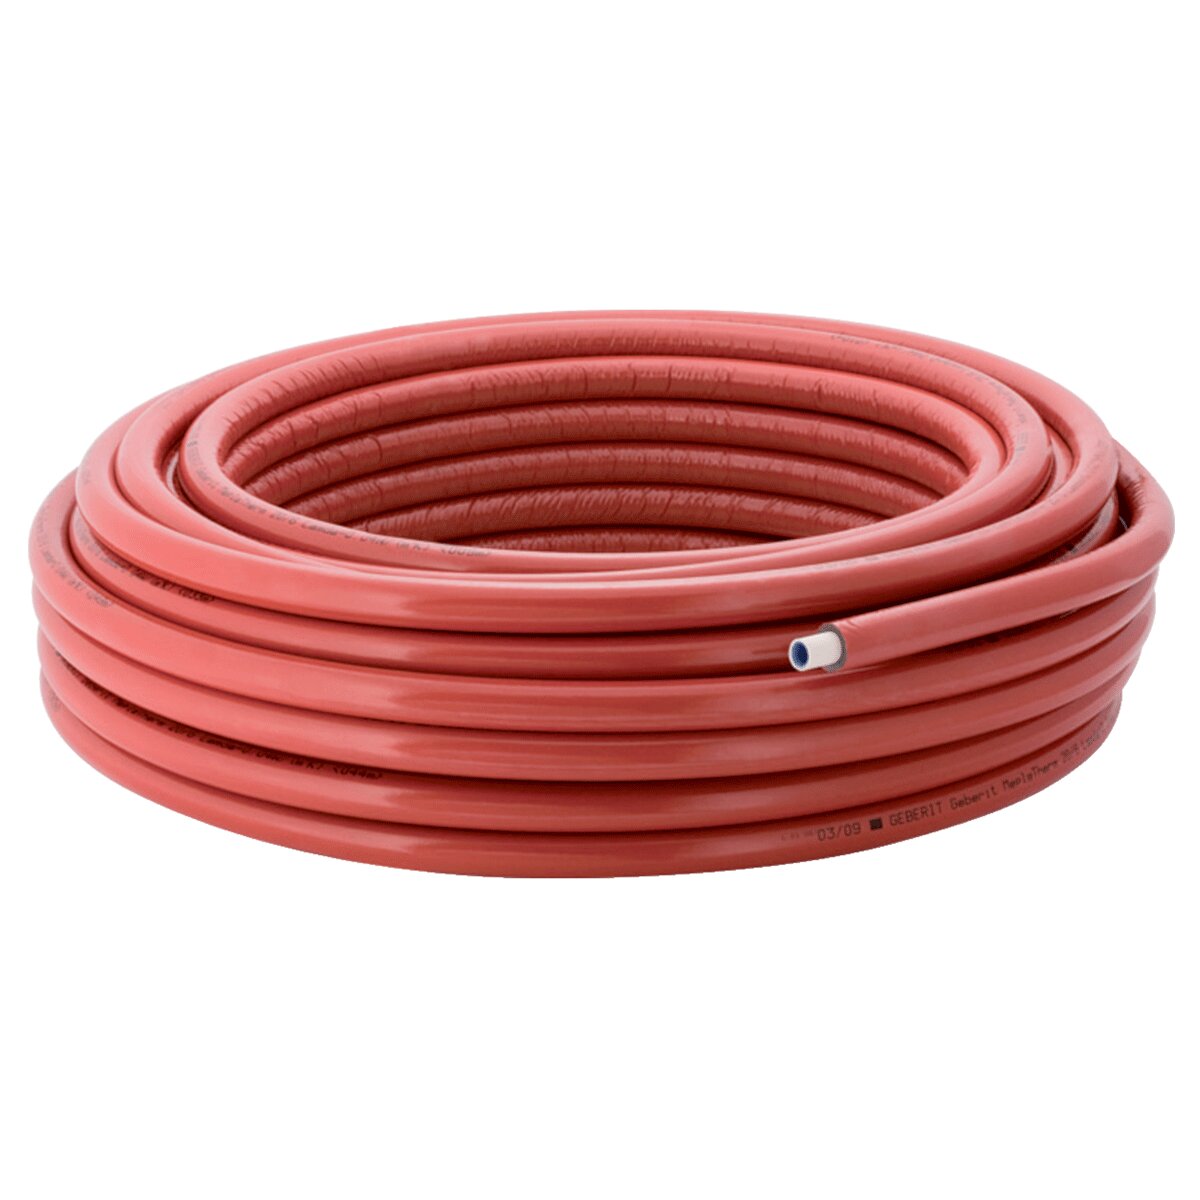 Geberit Mepla Therm multilayer pipe Ø26x6 with 6 mm insulating sheath - For heating